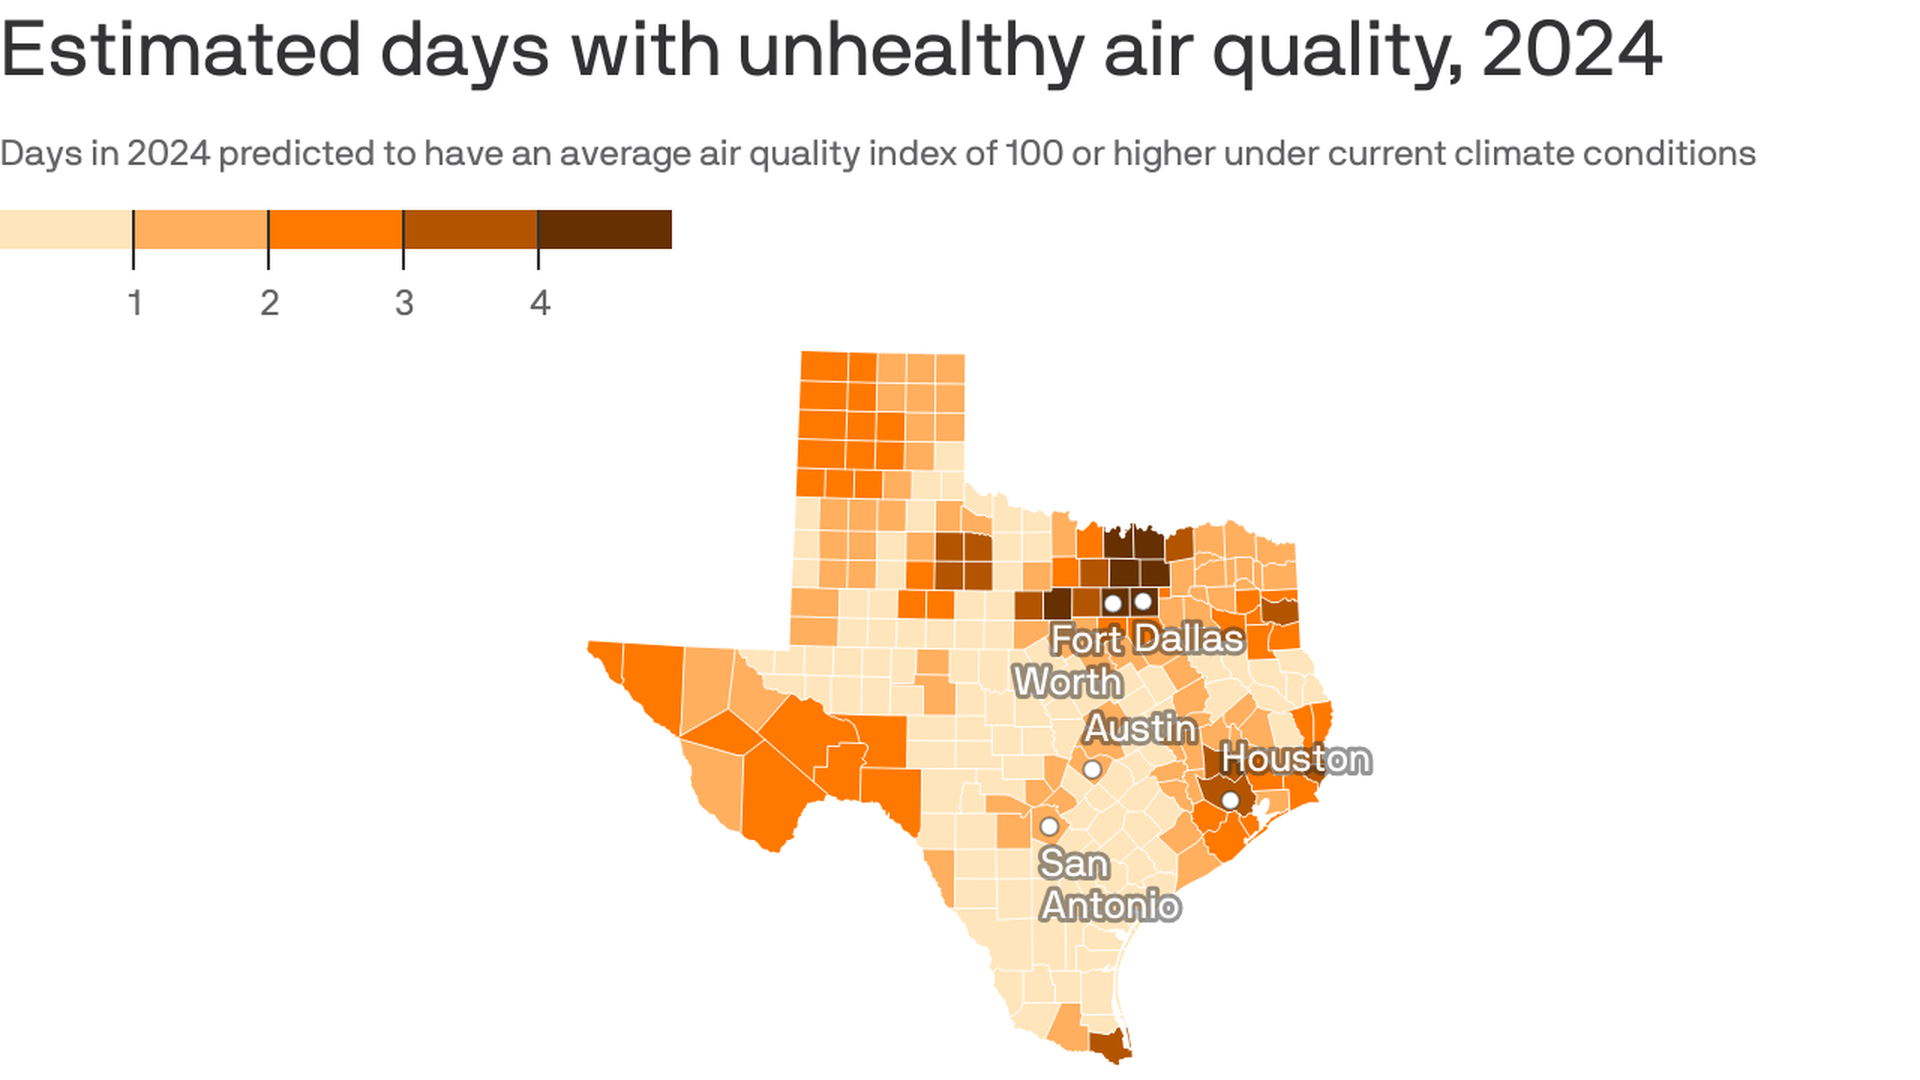 A map of estimated days with unhealthy air quality in Texas for 2024.